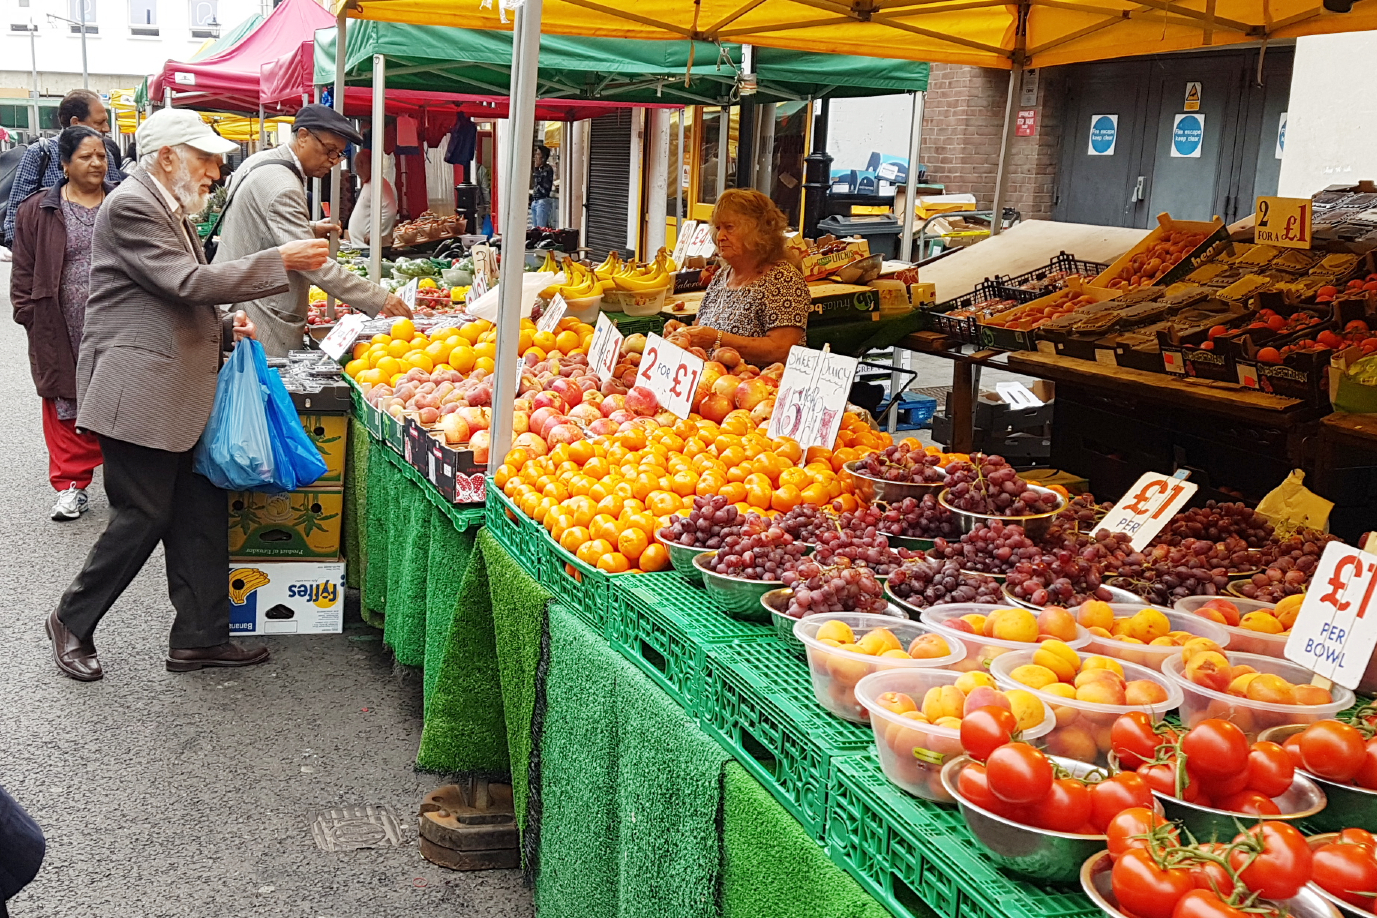 People browsing and buying fruit from a street market stall